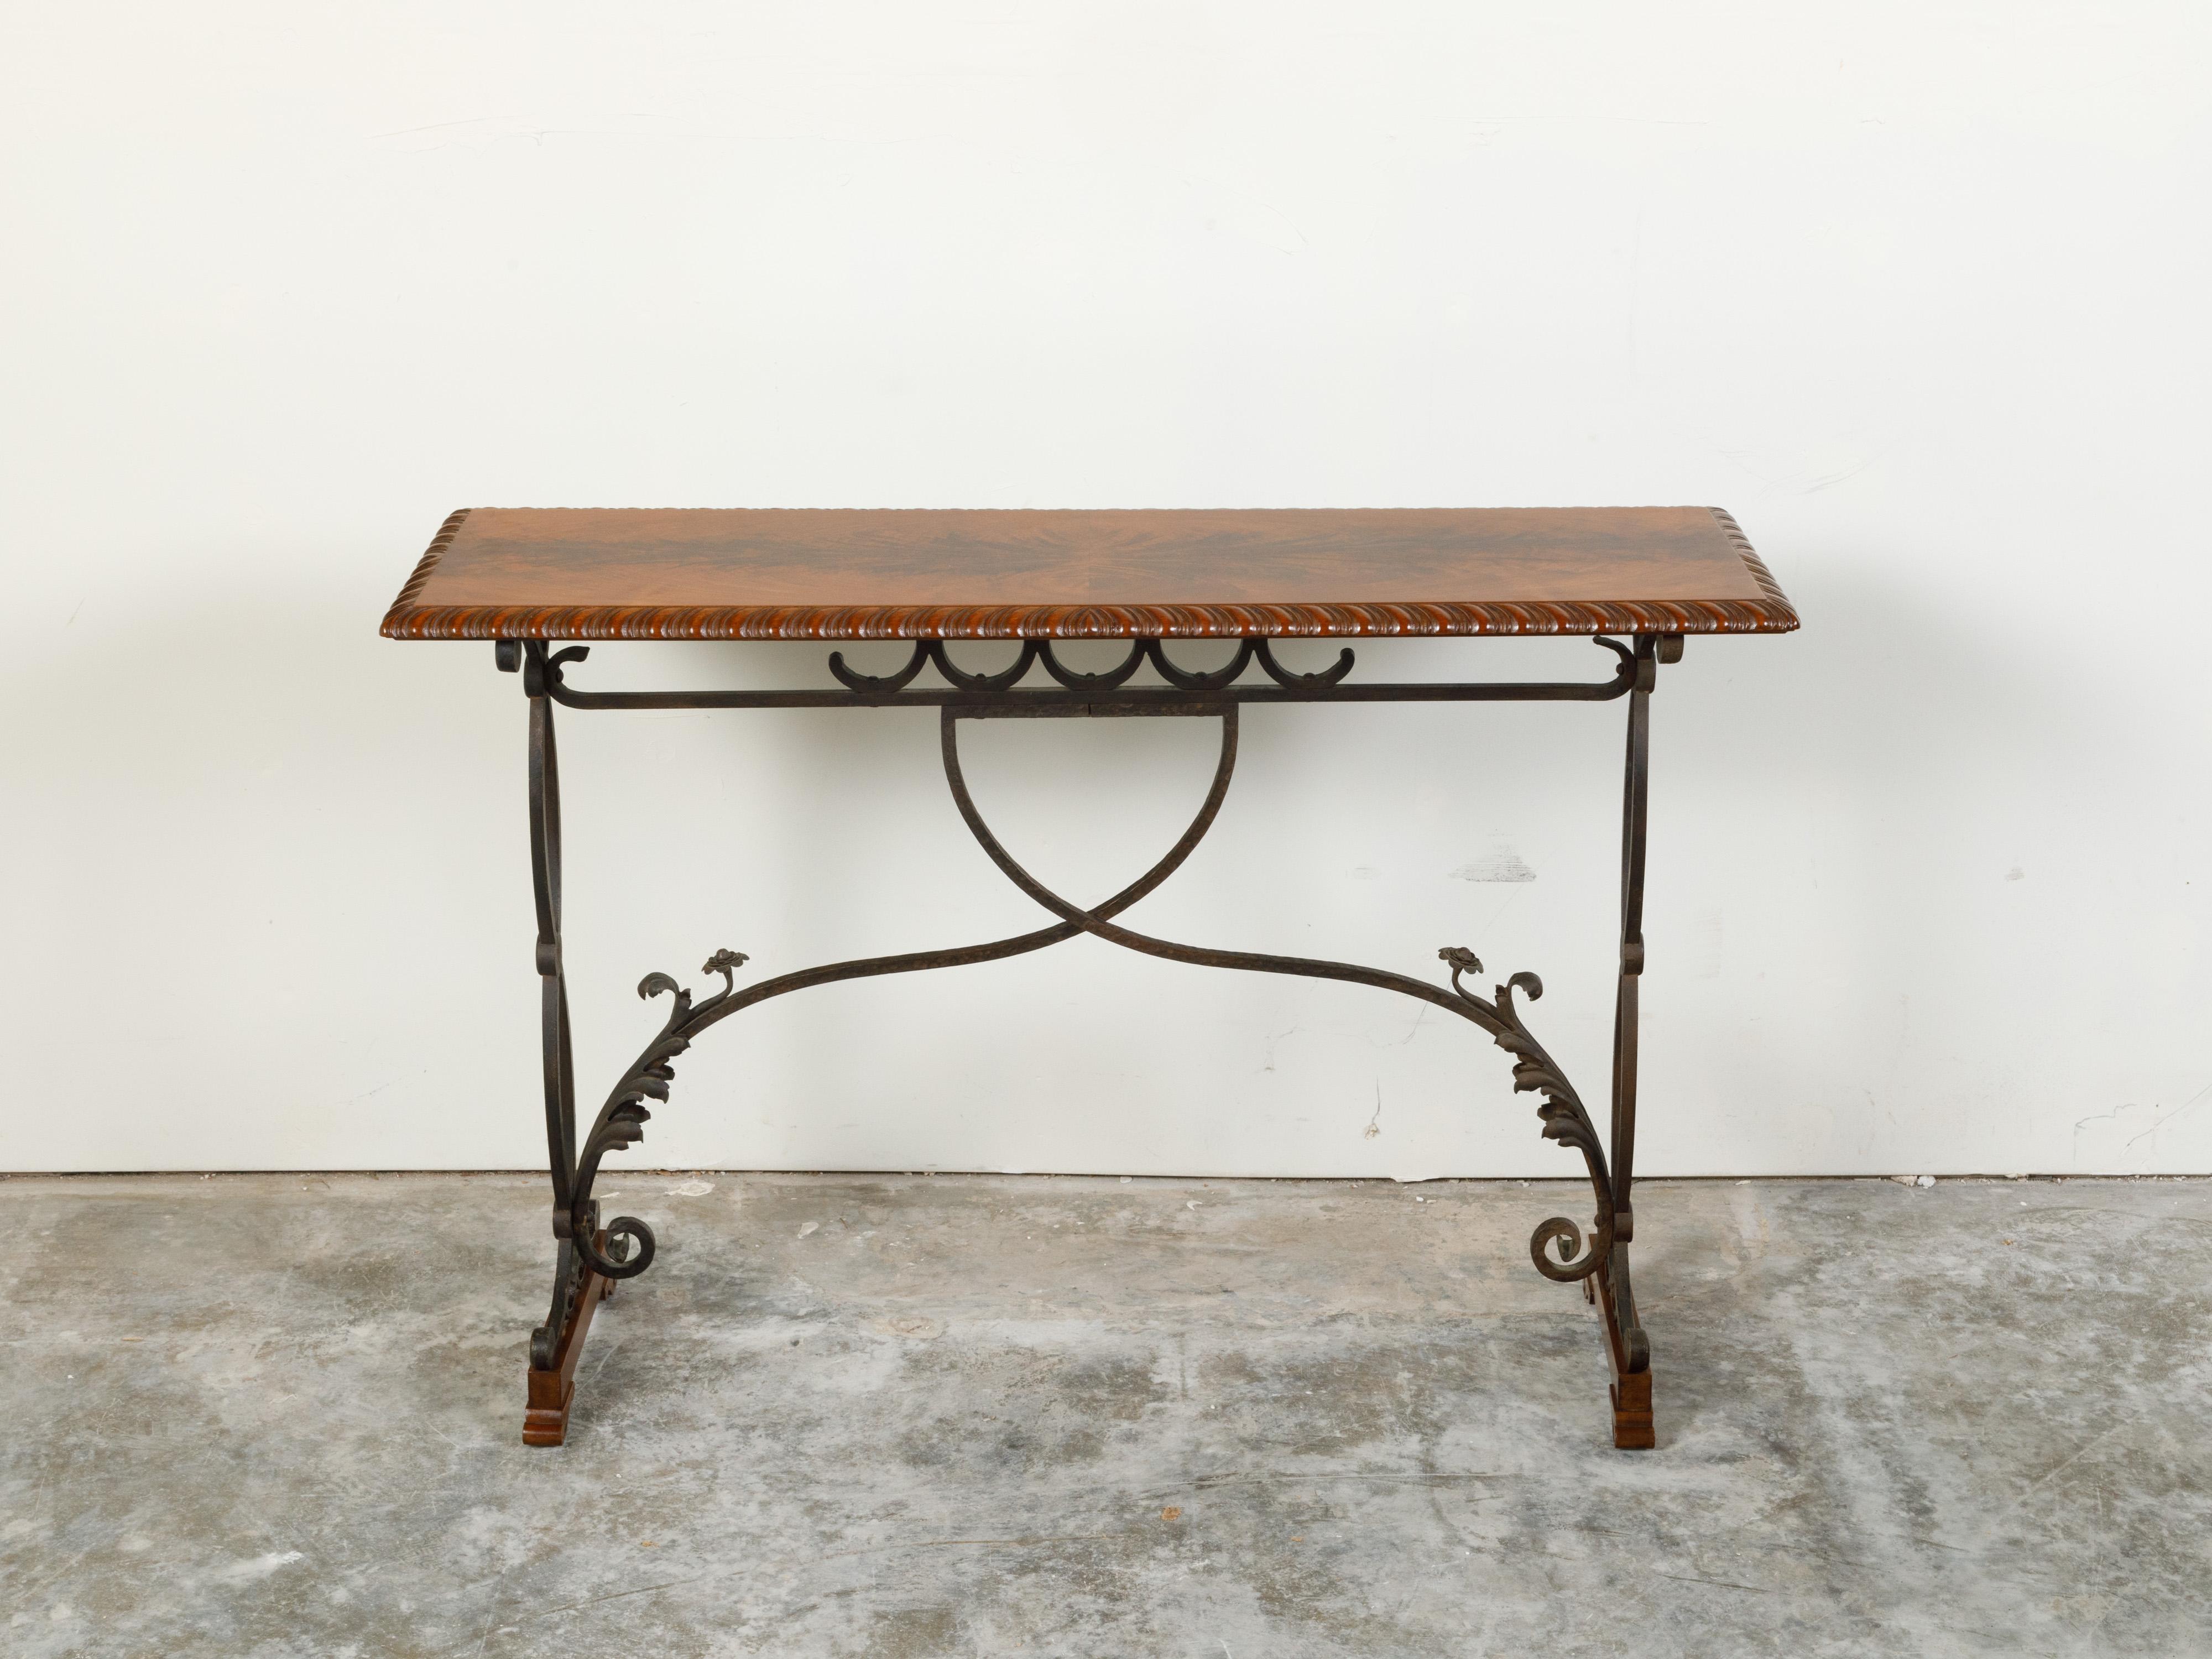 An Italian console table from the early 20th century, with walnut butterfly veneered top and iron scrolling base. Created in Italy during the early years of the 20th century, this console table features a handsome walnut top with butterfly veneer